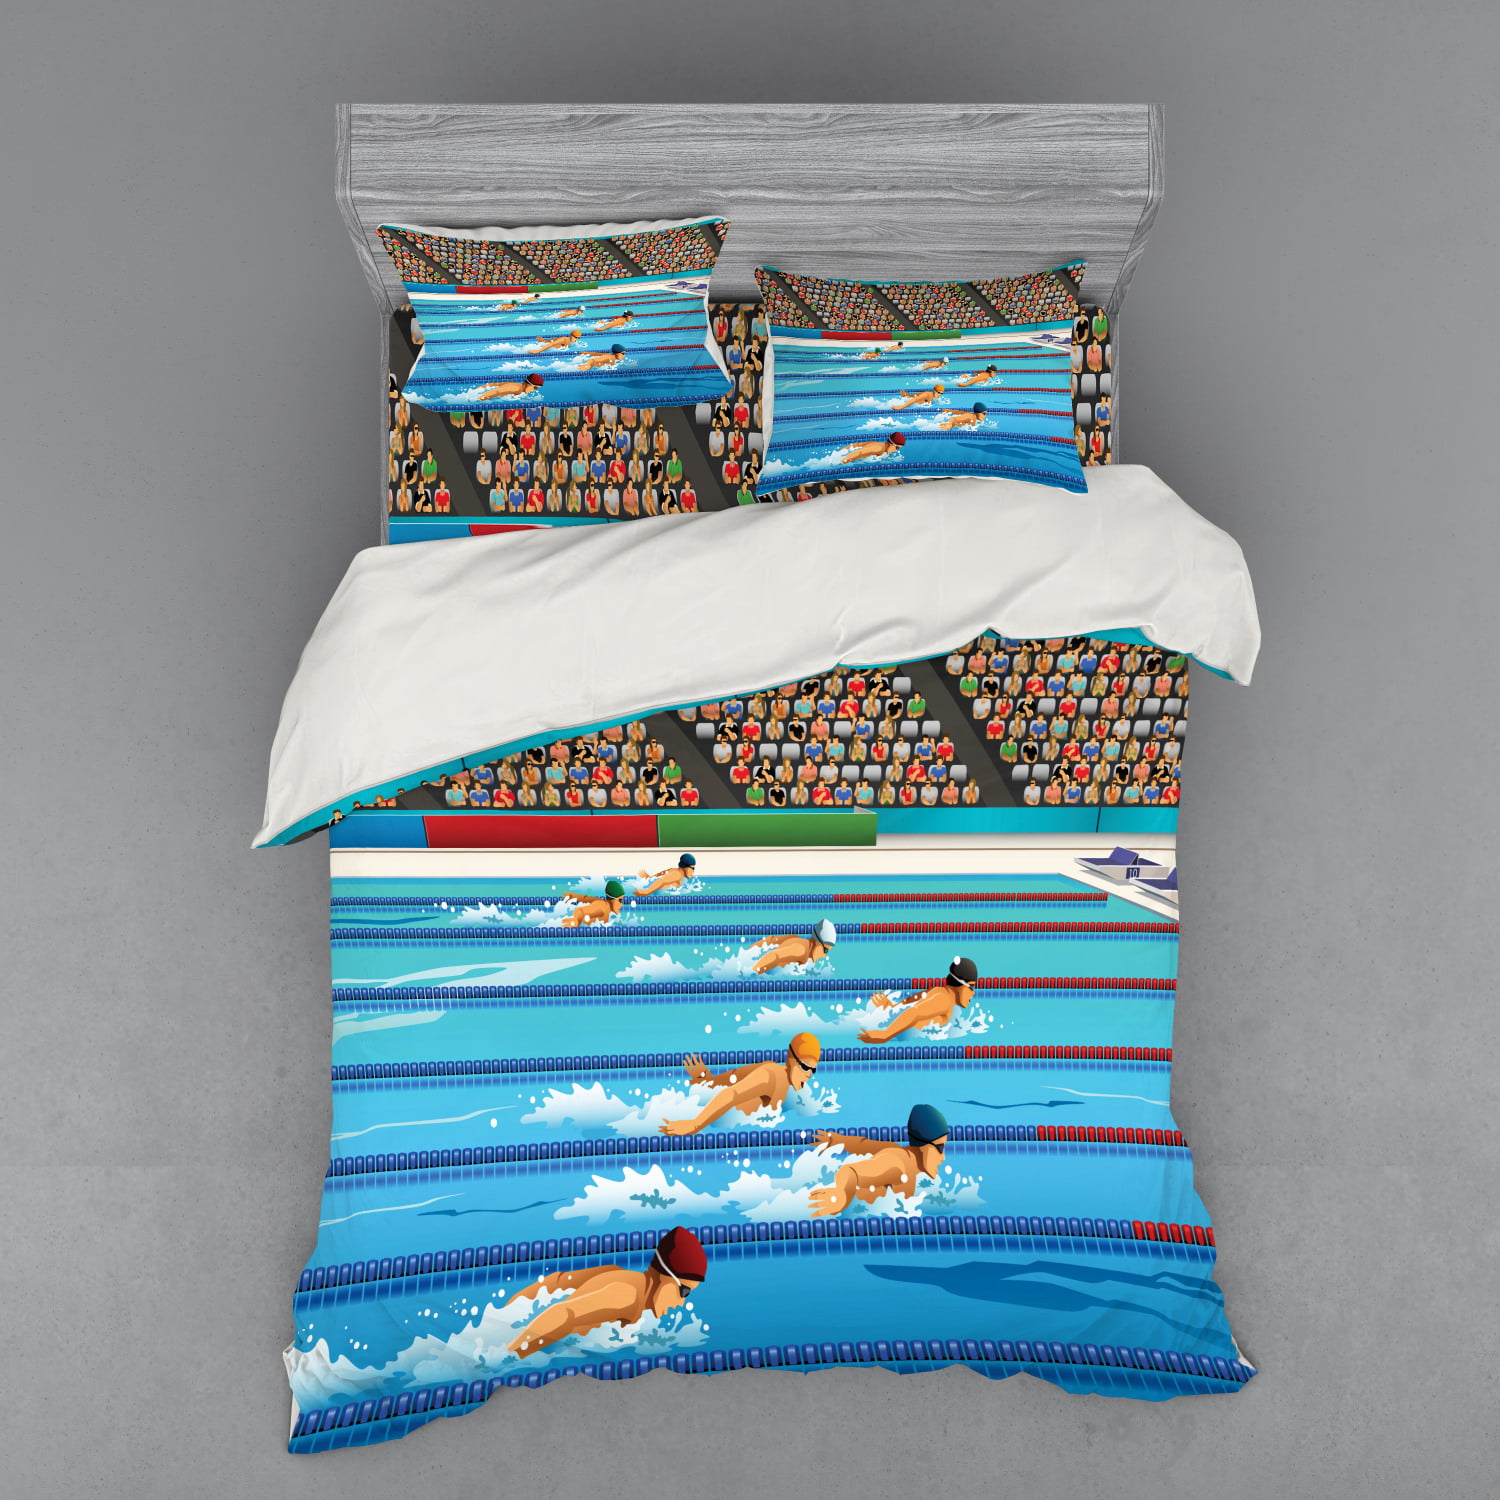 Details about   Cartoon Quilted Coverlet & Pillow Shams Set Olympics Swimming Race Print 